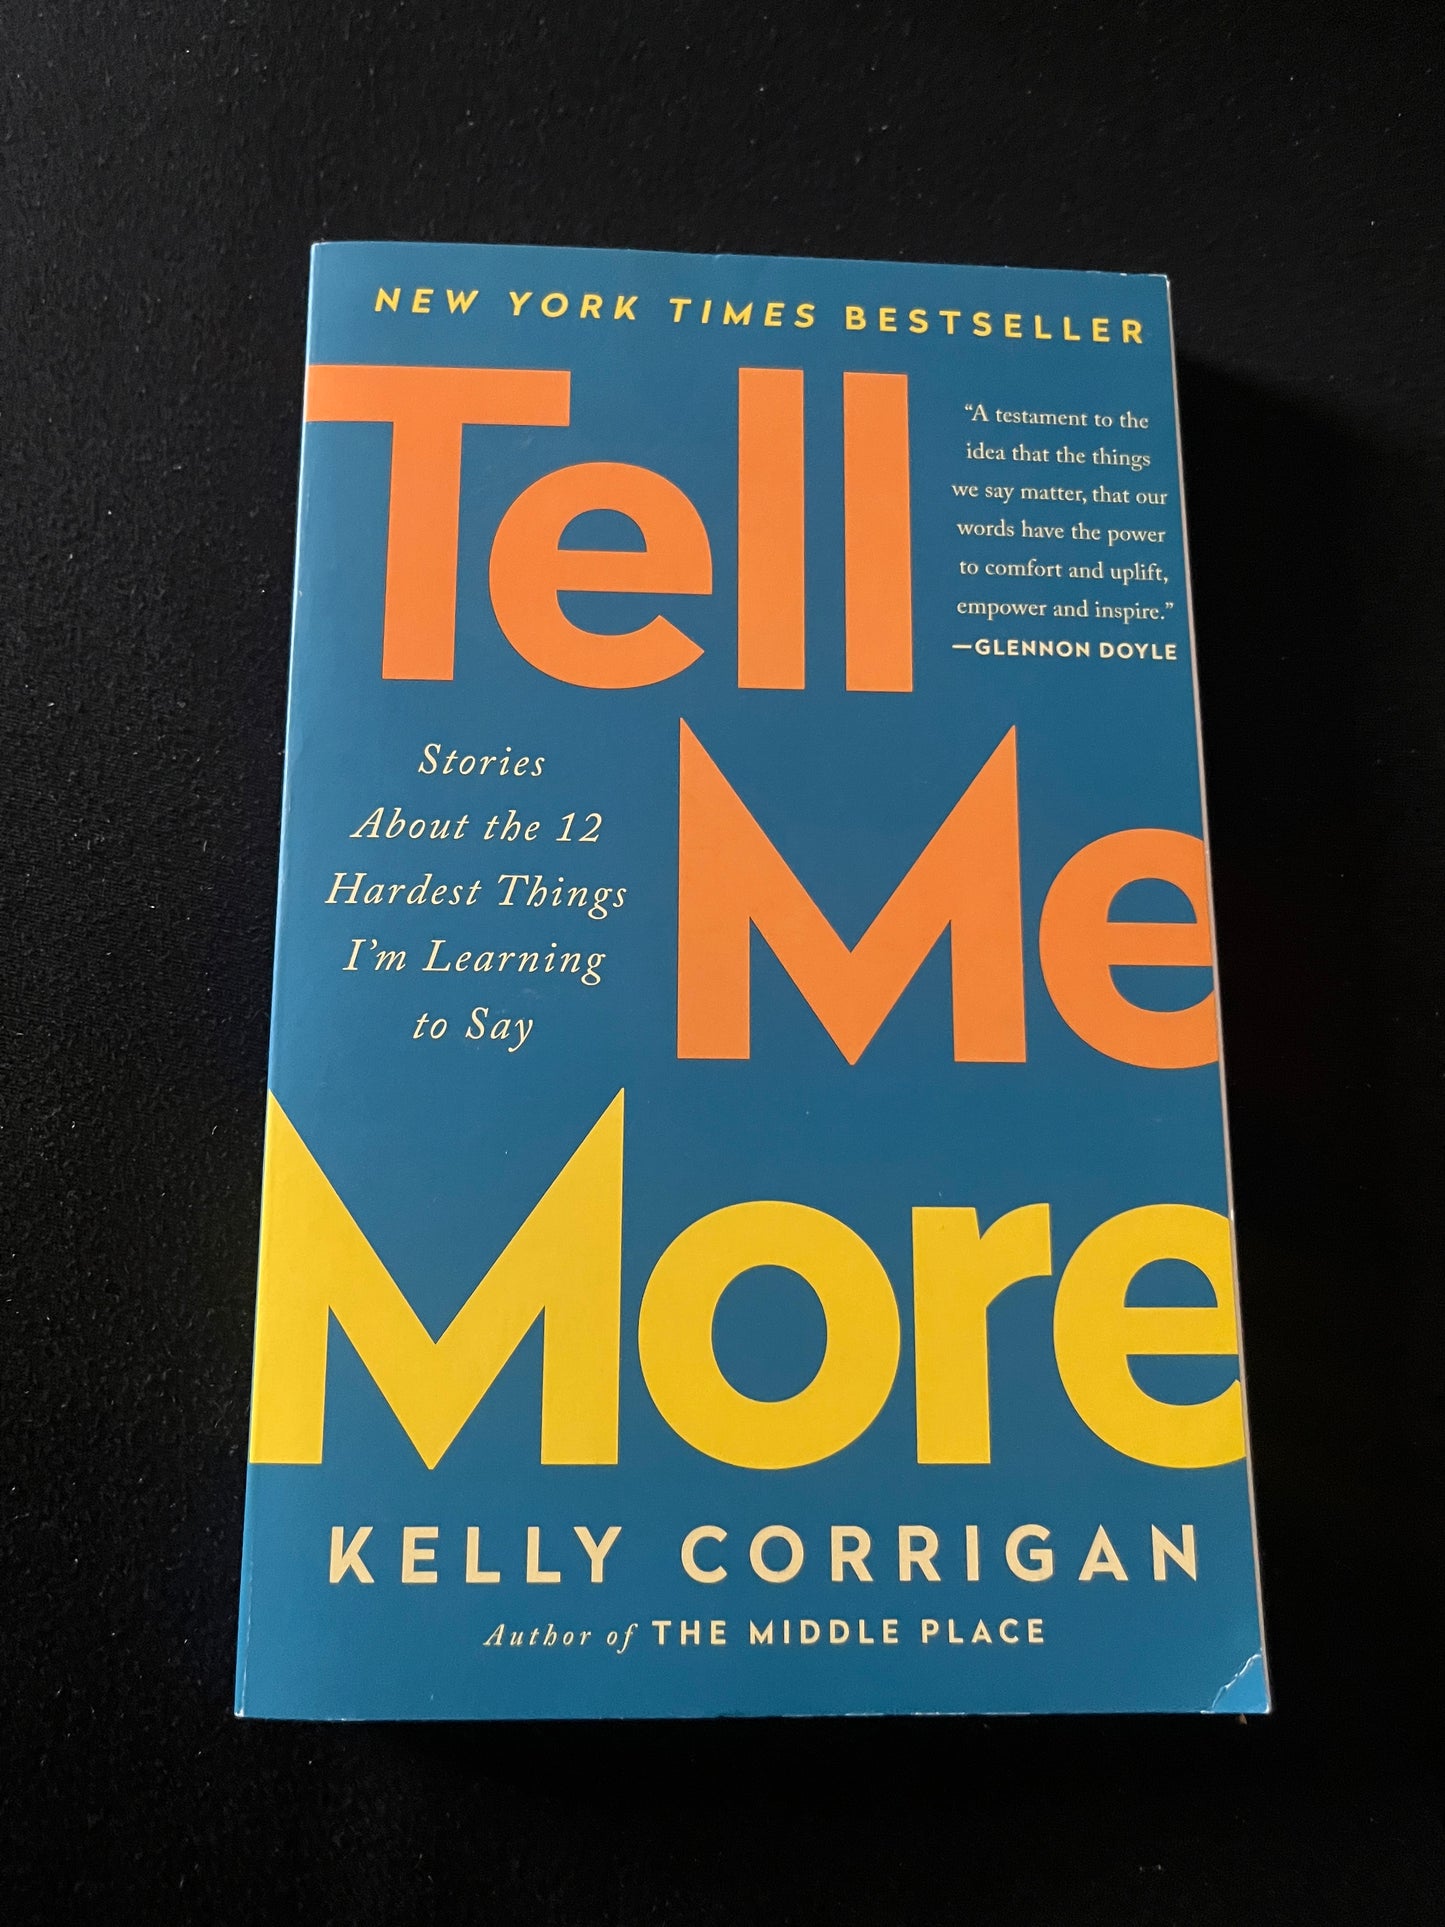 TELL ME MORE: Stories About the 12 Hardest Things I'm Learning to Say by Kelly Corrigan